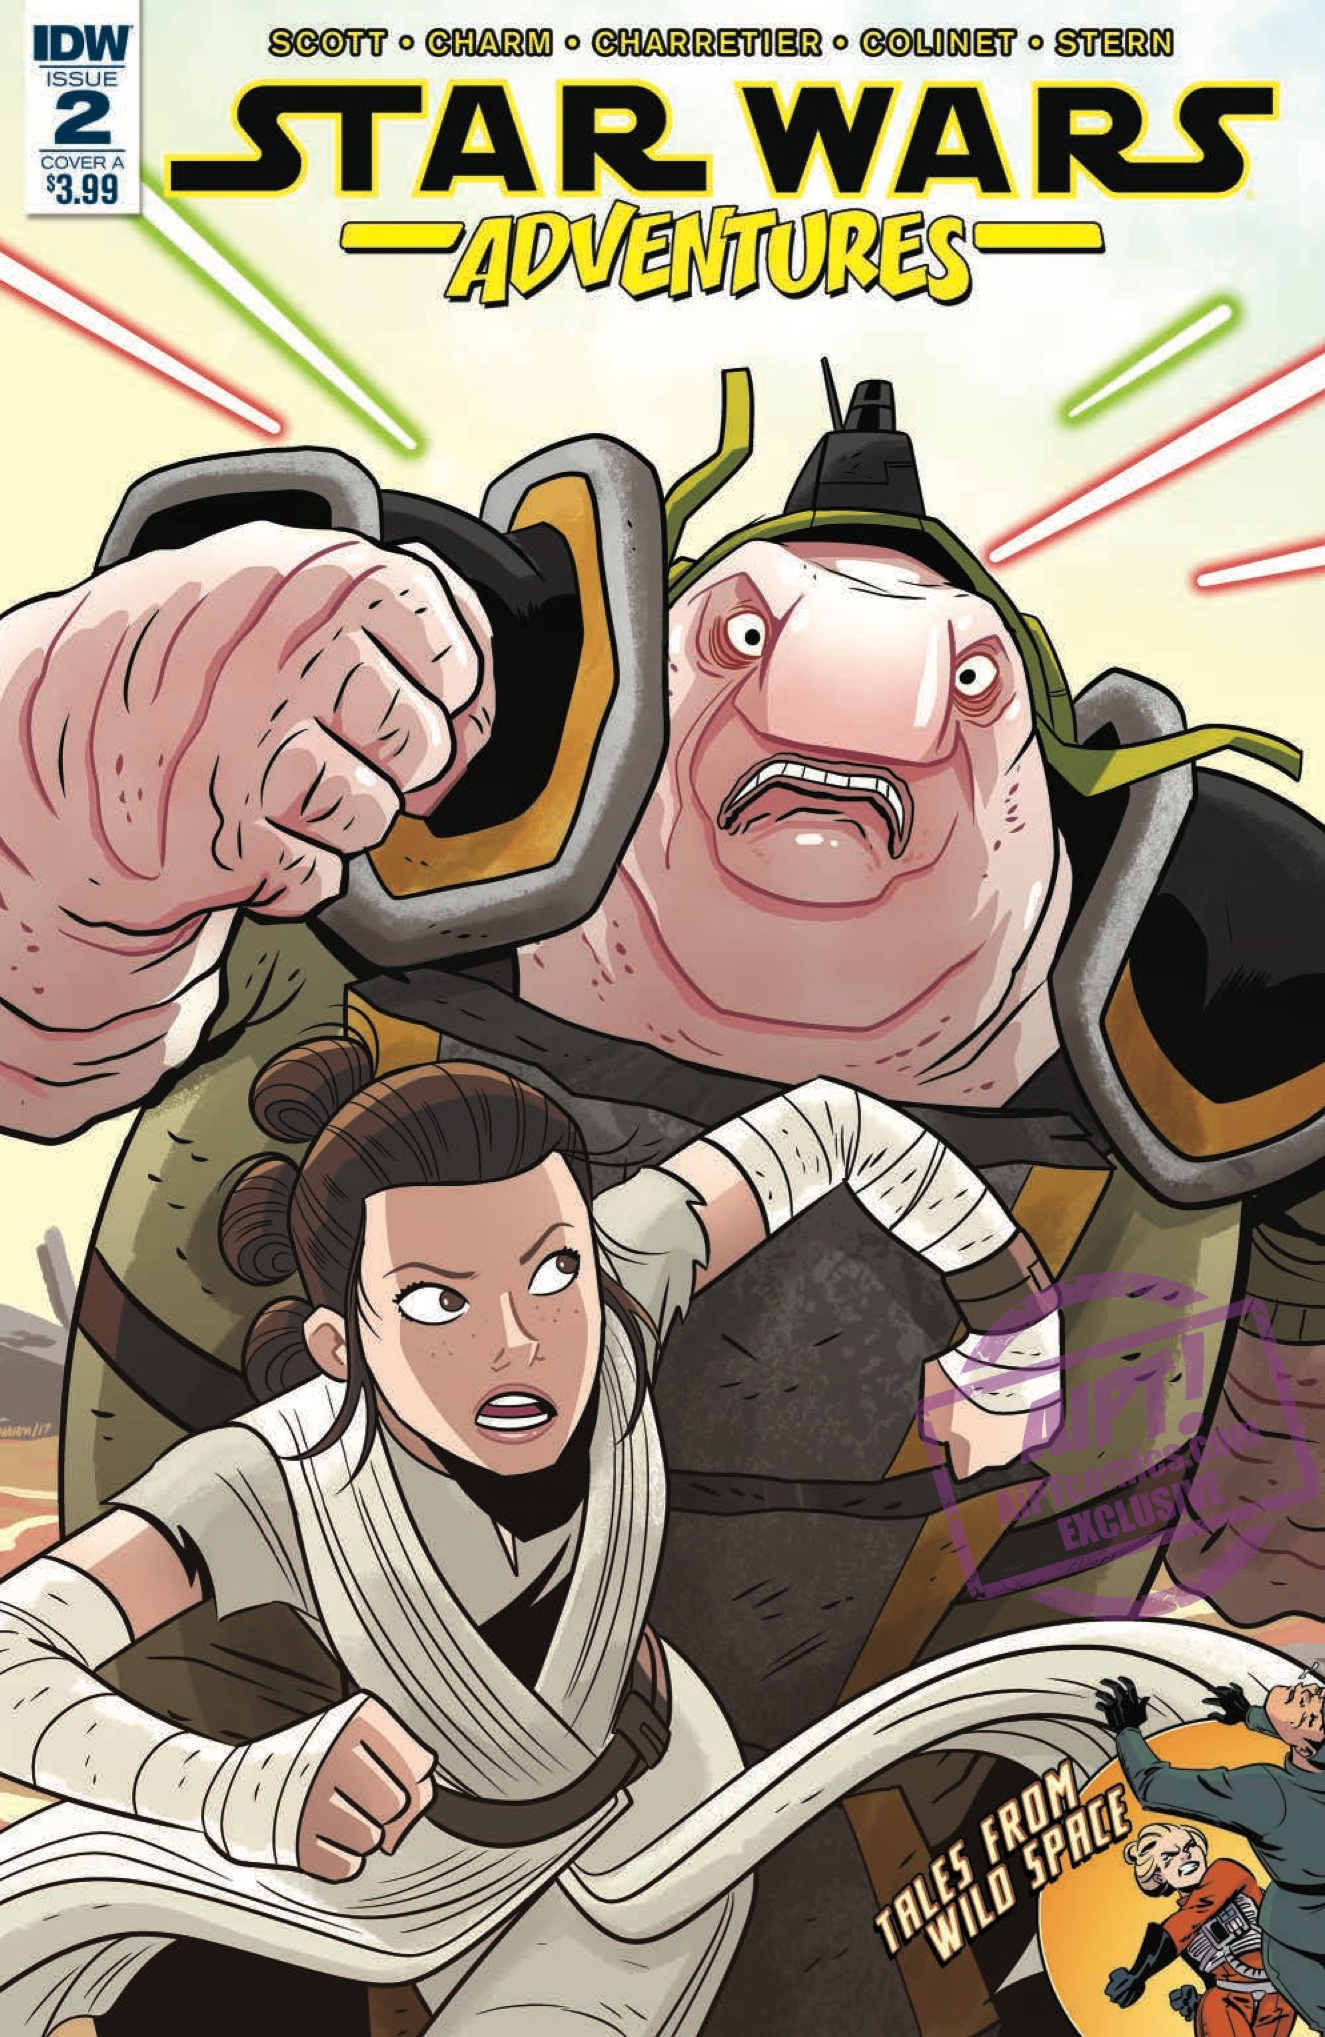 [EXCLUSIVE] IDW Preview: Star Wars Adventures #2